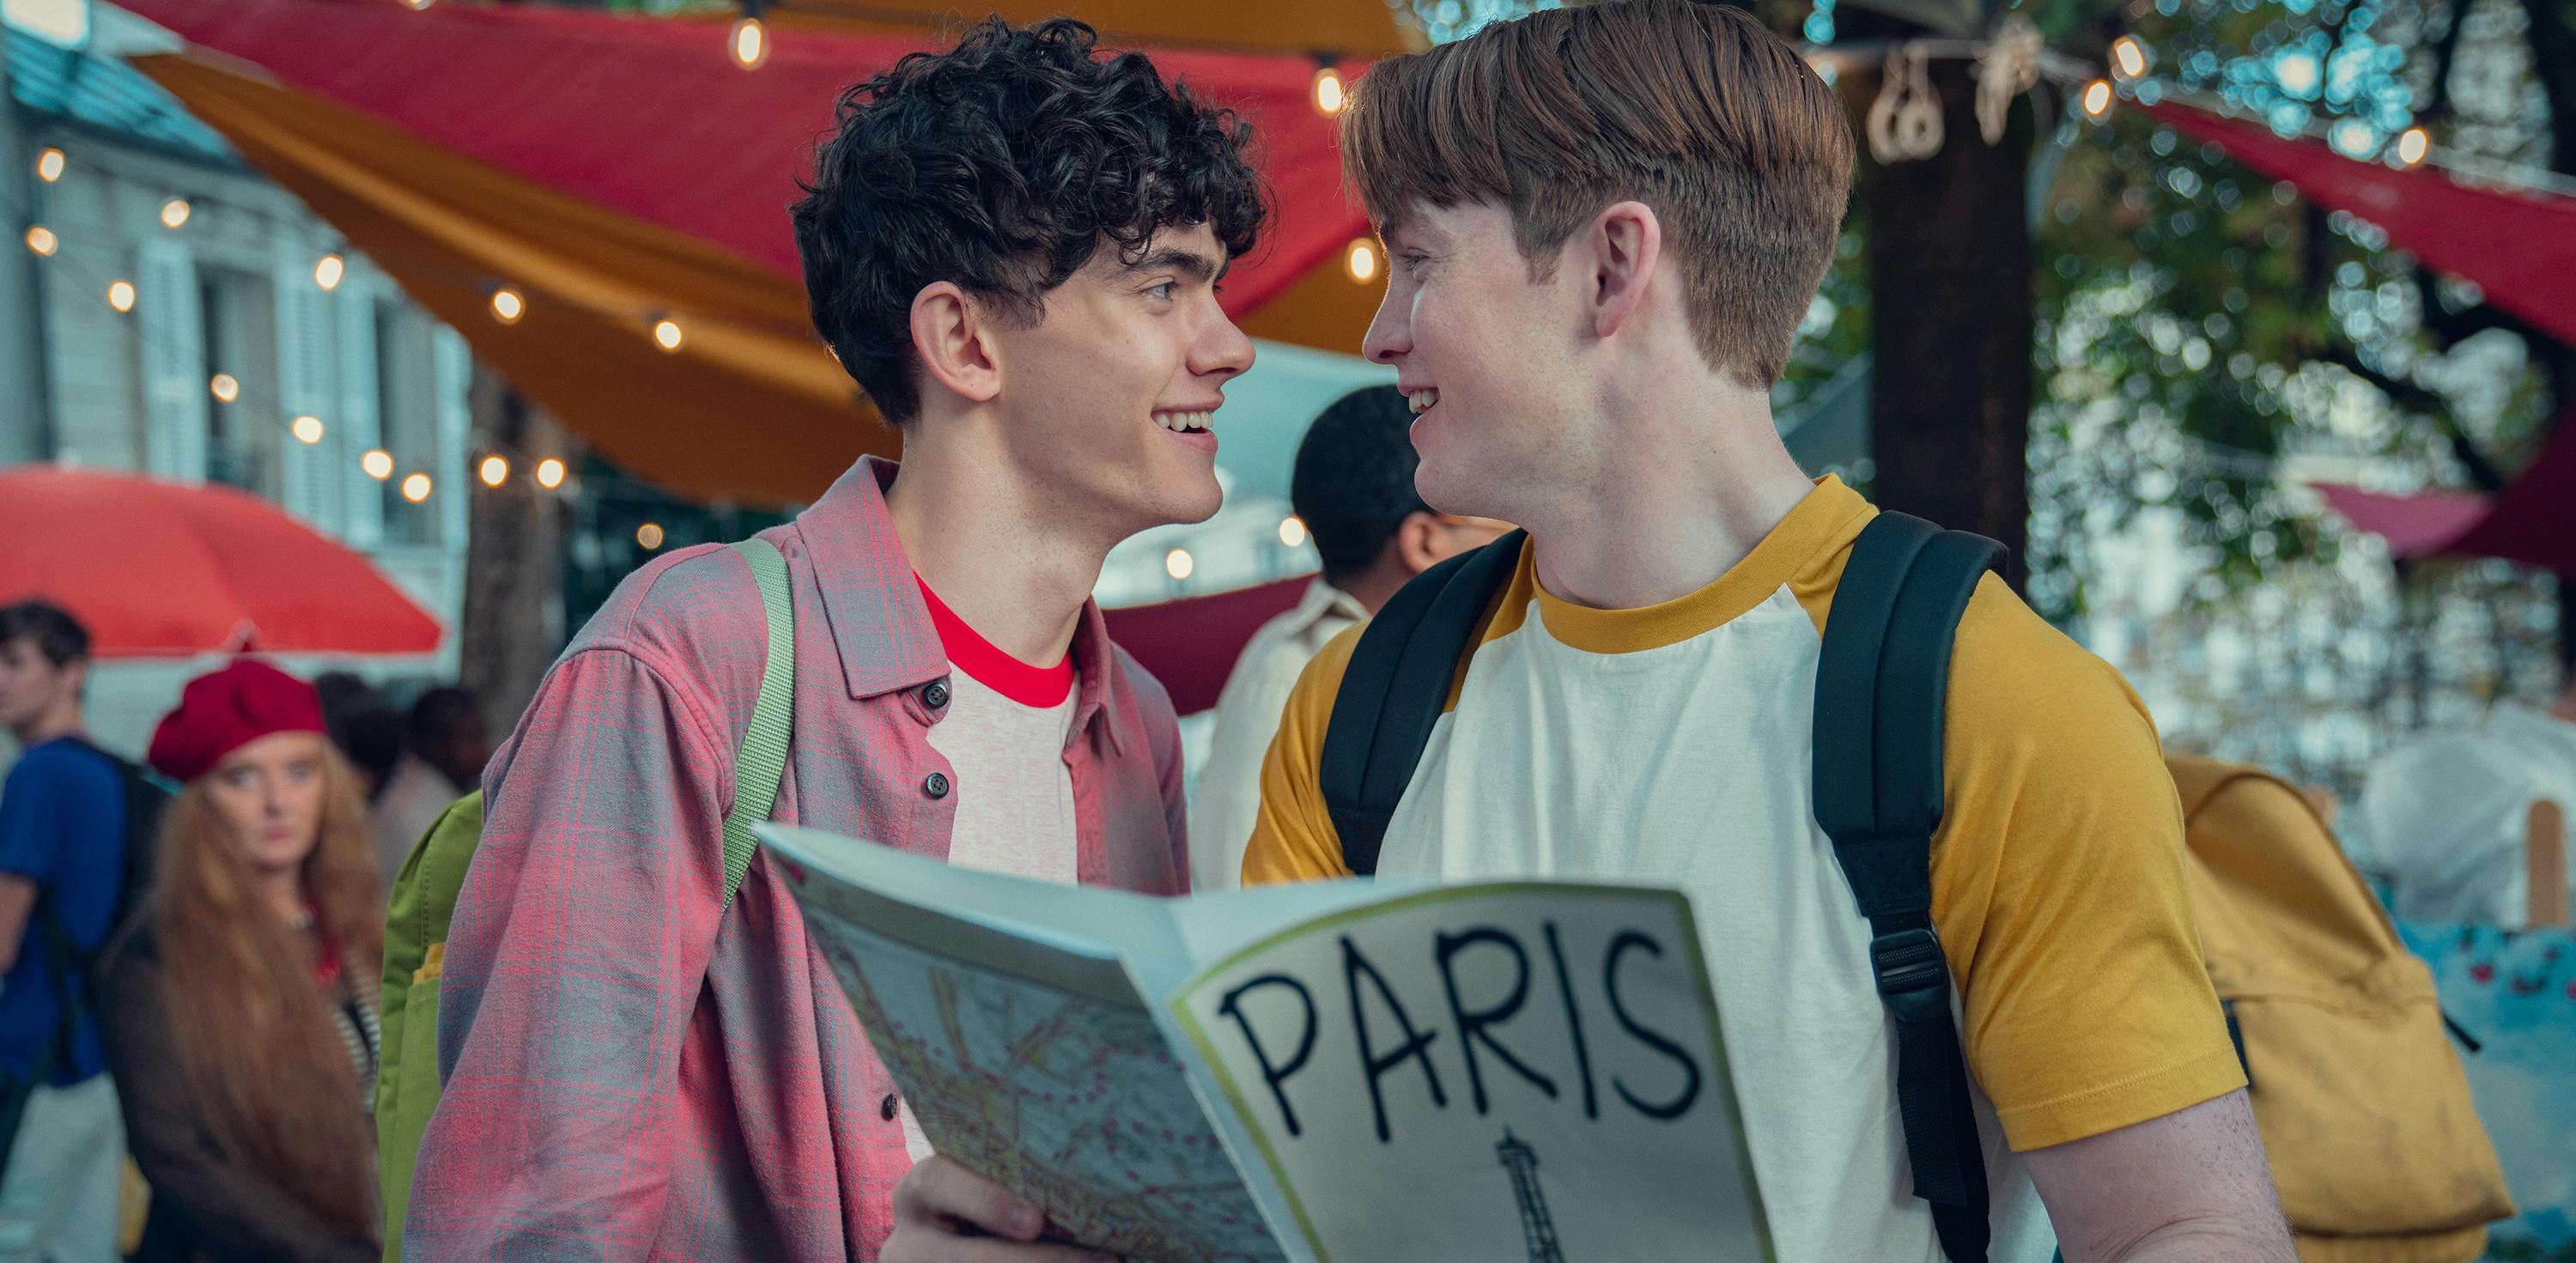 Charlie Spring (Joe Locke) and Nick Nelson (Kit Connor) share a romantic moment over a book titled Paris. Charlie wears a plaid button-up and Nick wears a yellow-and-white baseball shirt.